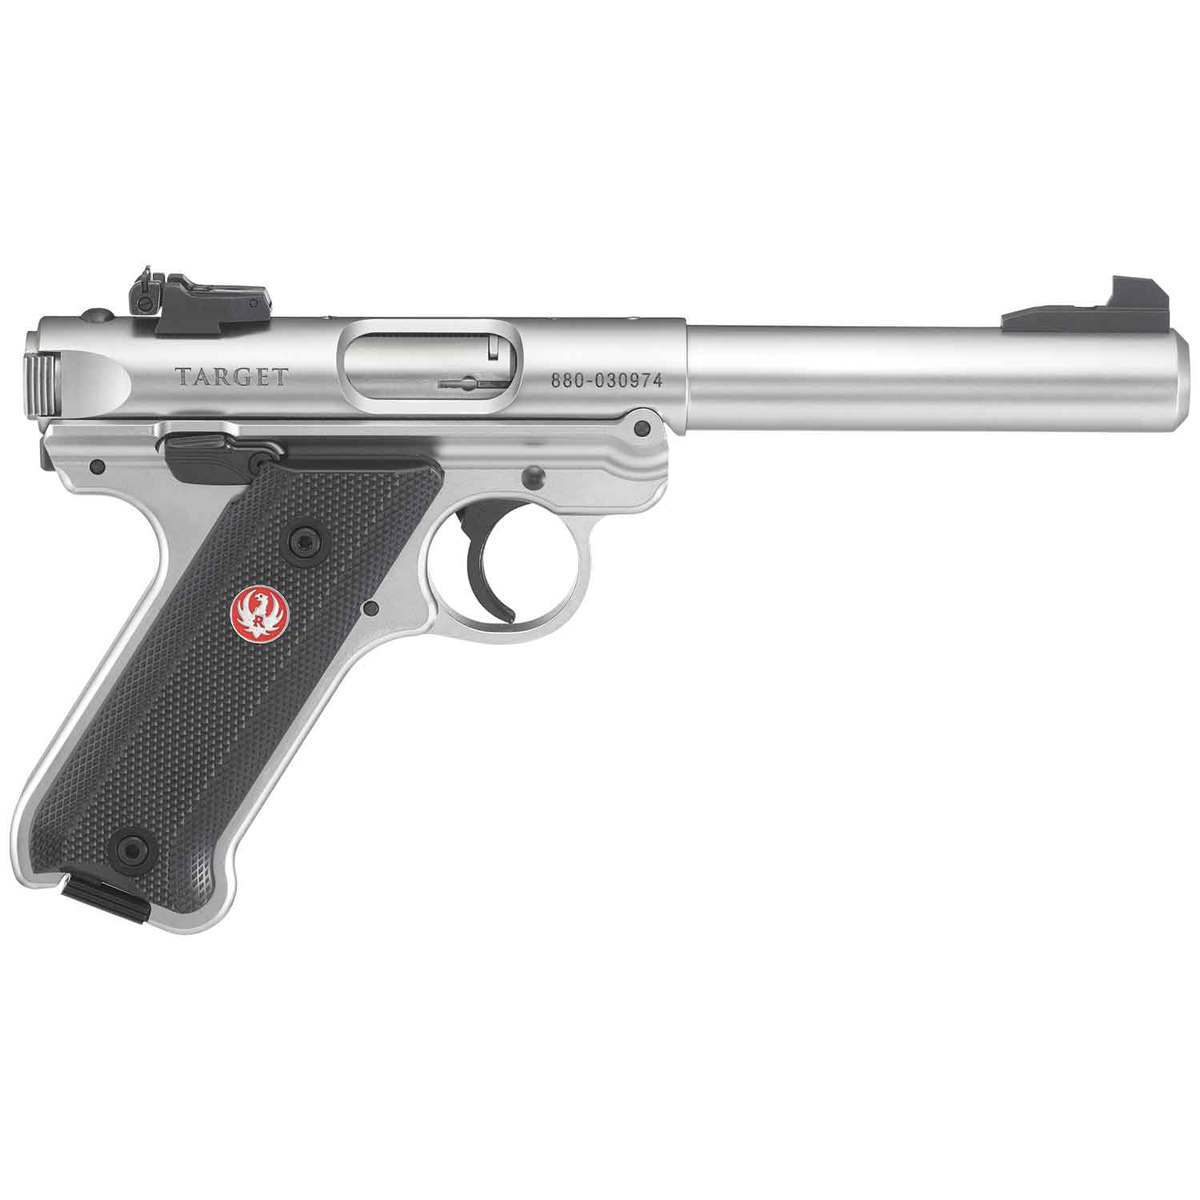 Ruger Mark Iv Target 22 Long Rifle 55in Stainless Pistol 101 Rounds Sportsmans Warehouse 9837